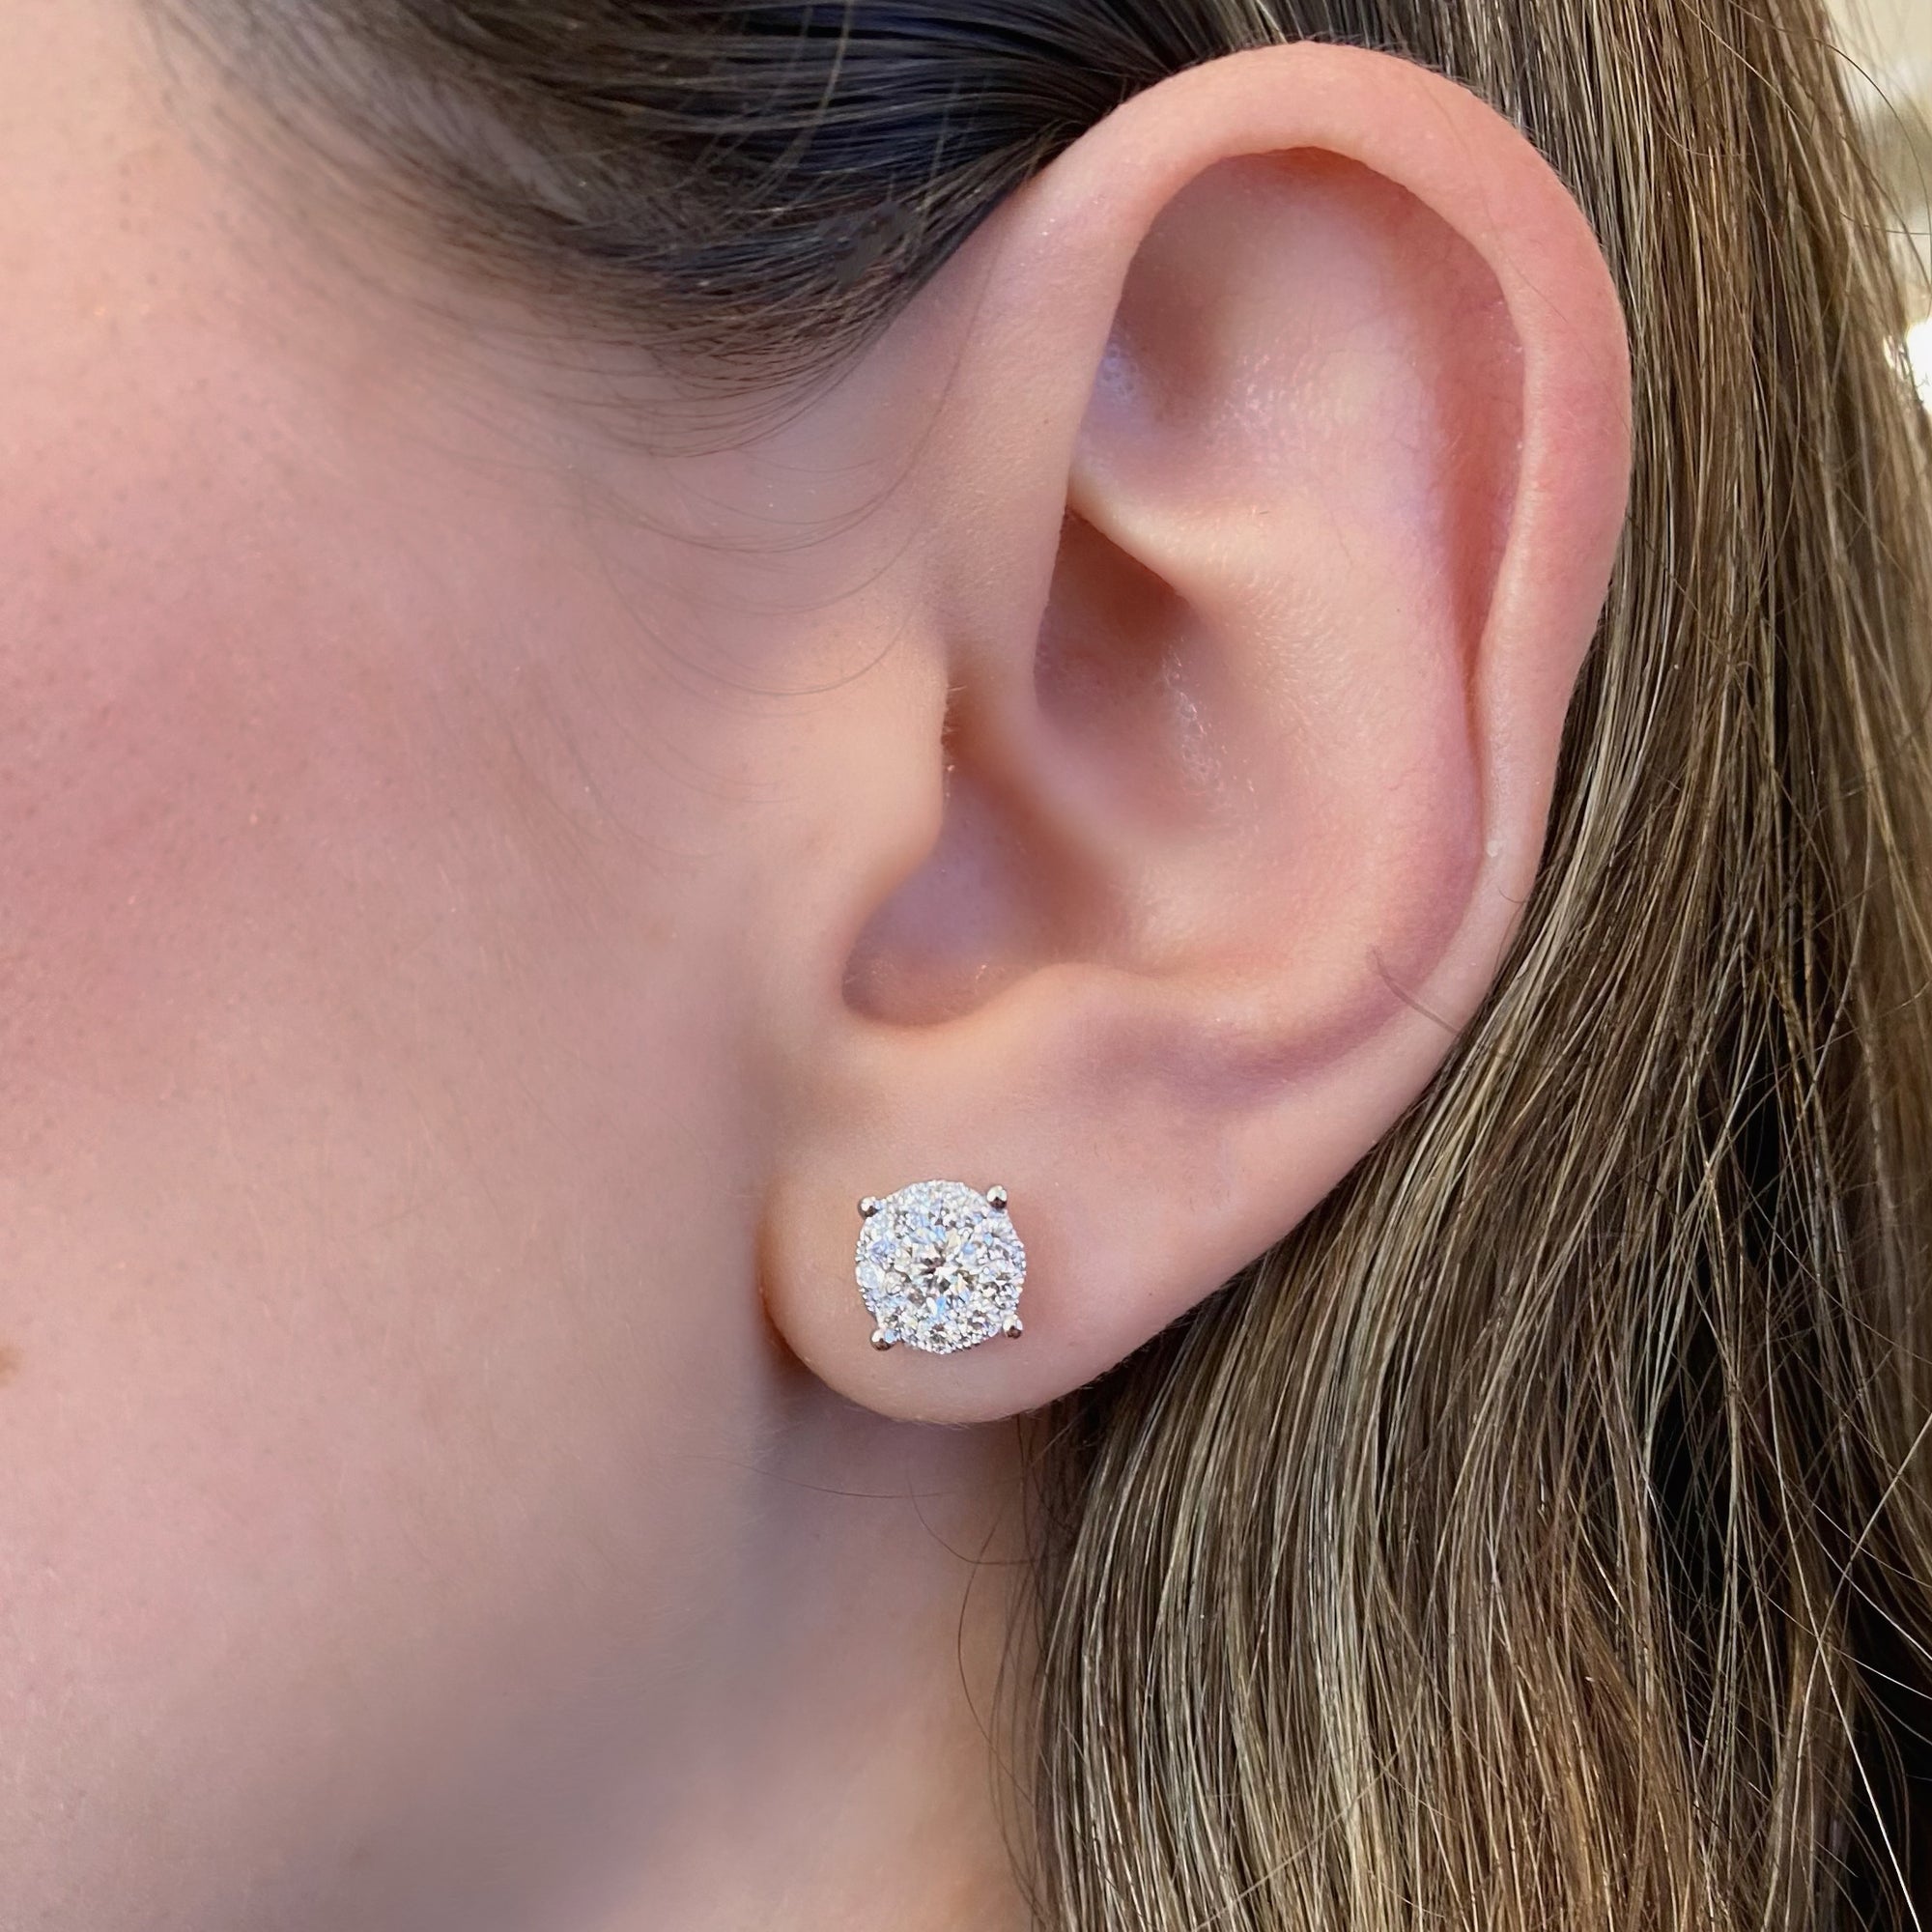 1.02 ct round diamond cluster earrings - 18K gold weighing 1.88 grams  - 2 round diamonds totaling 0.51 carats  - 18 round diamonds totaling 0.51 carats